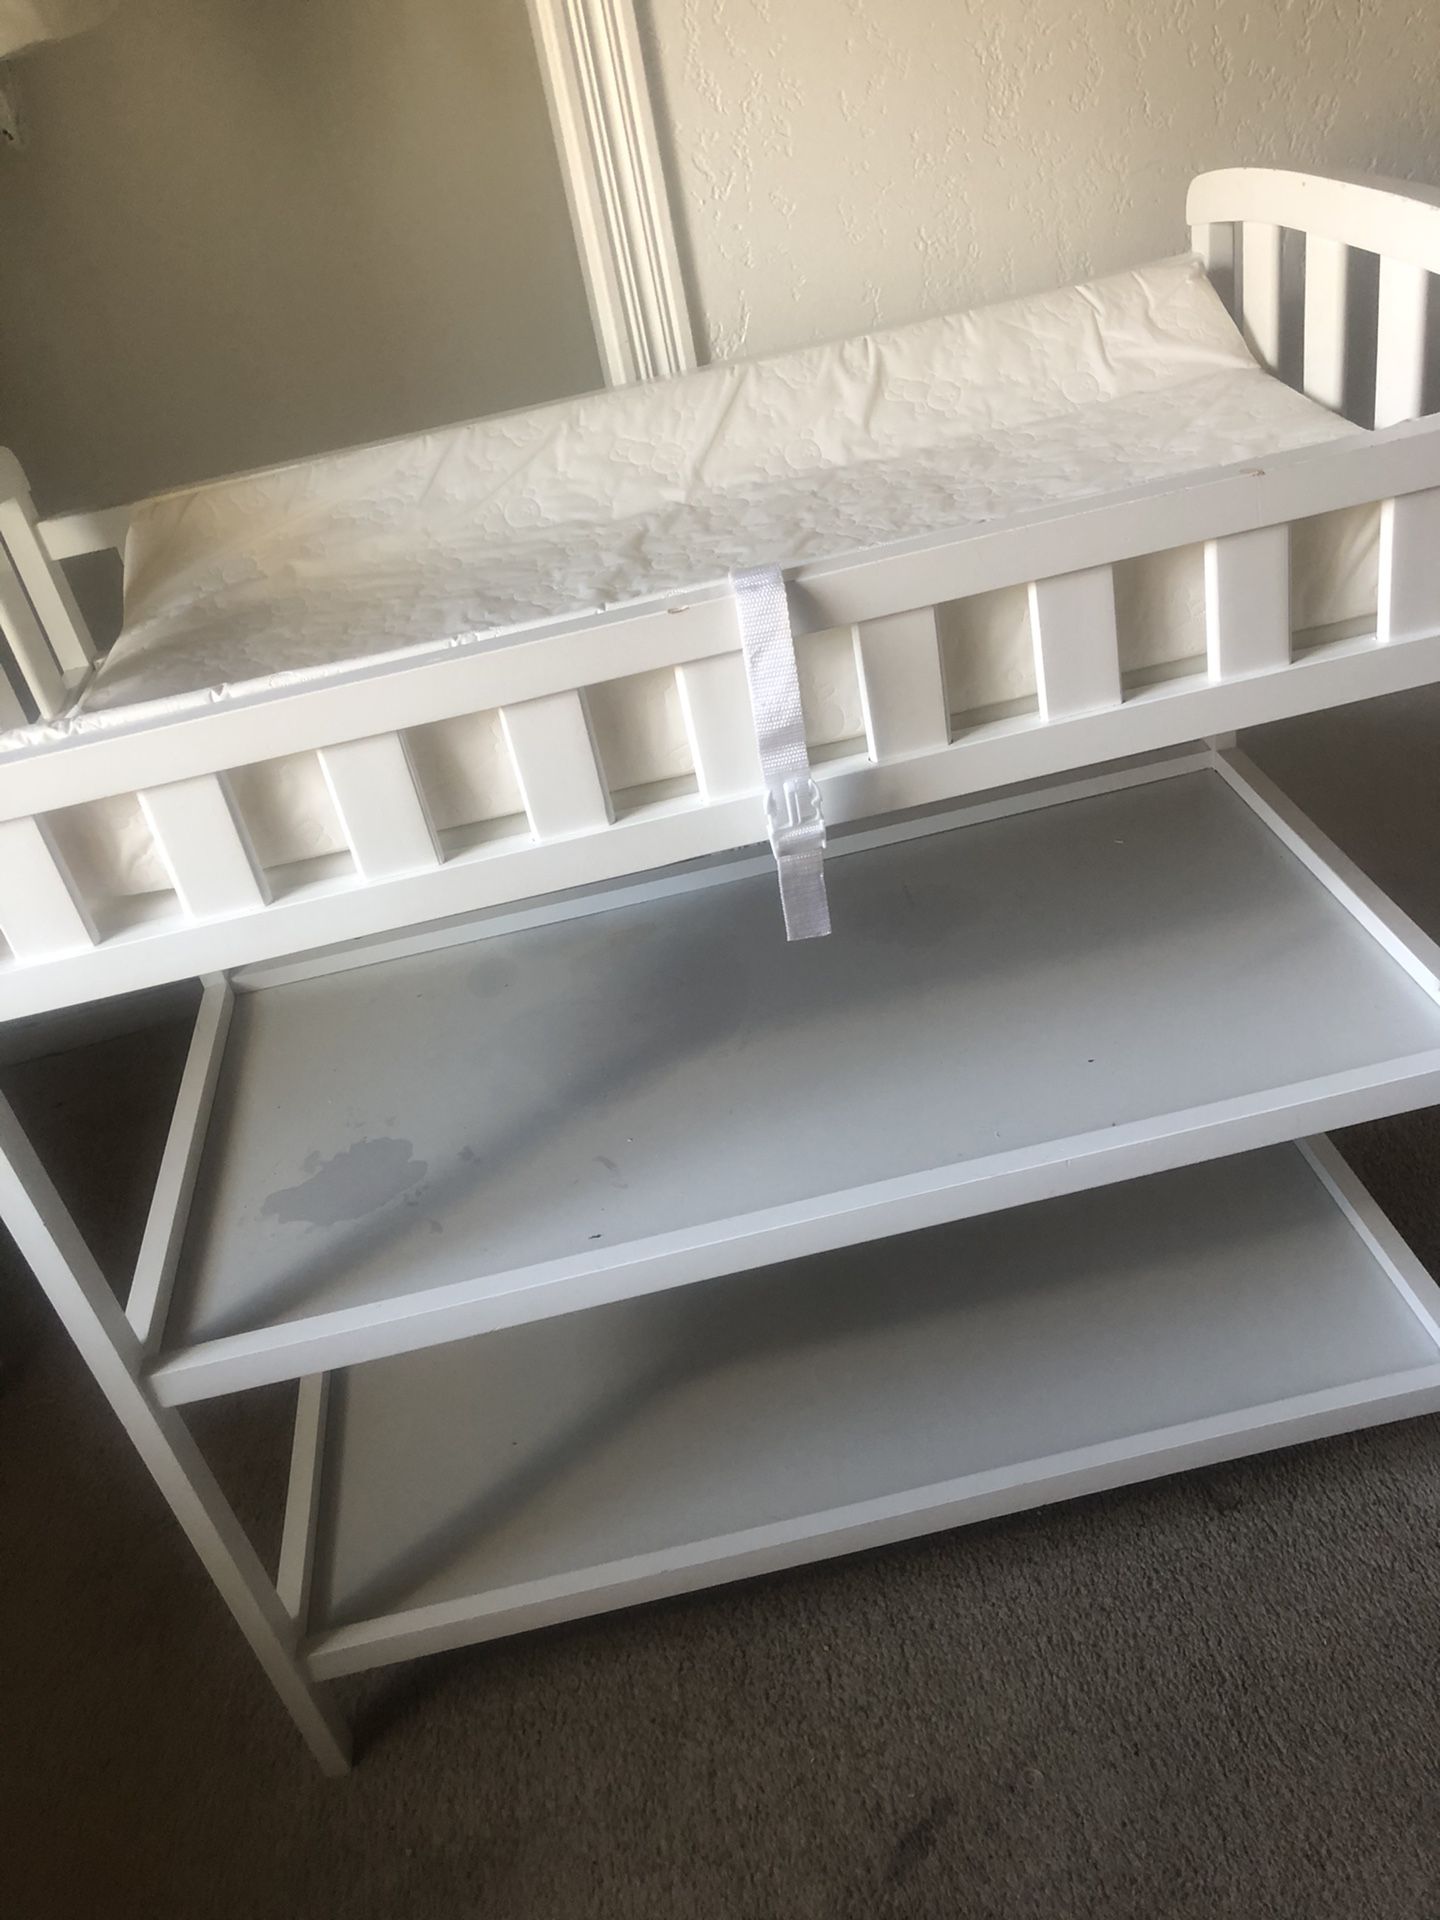 Rarely used BABY CHANGING TABLE - 30 or best offer